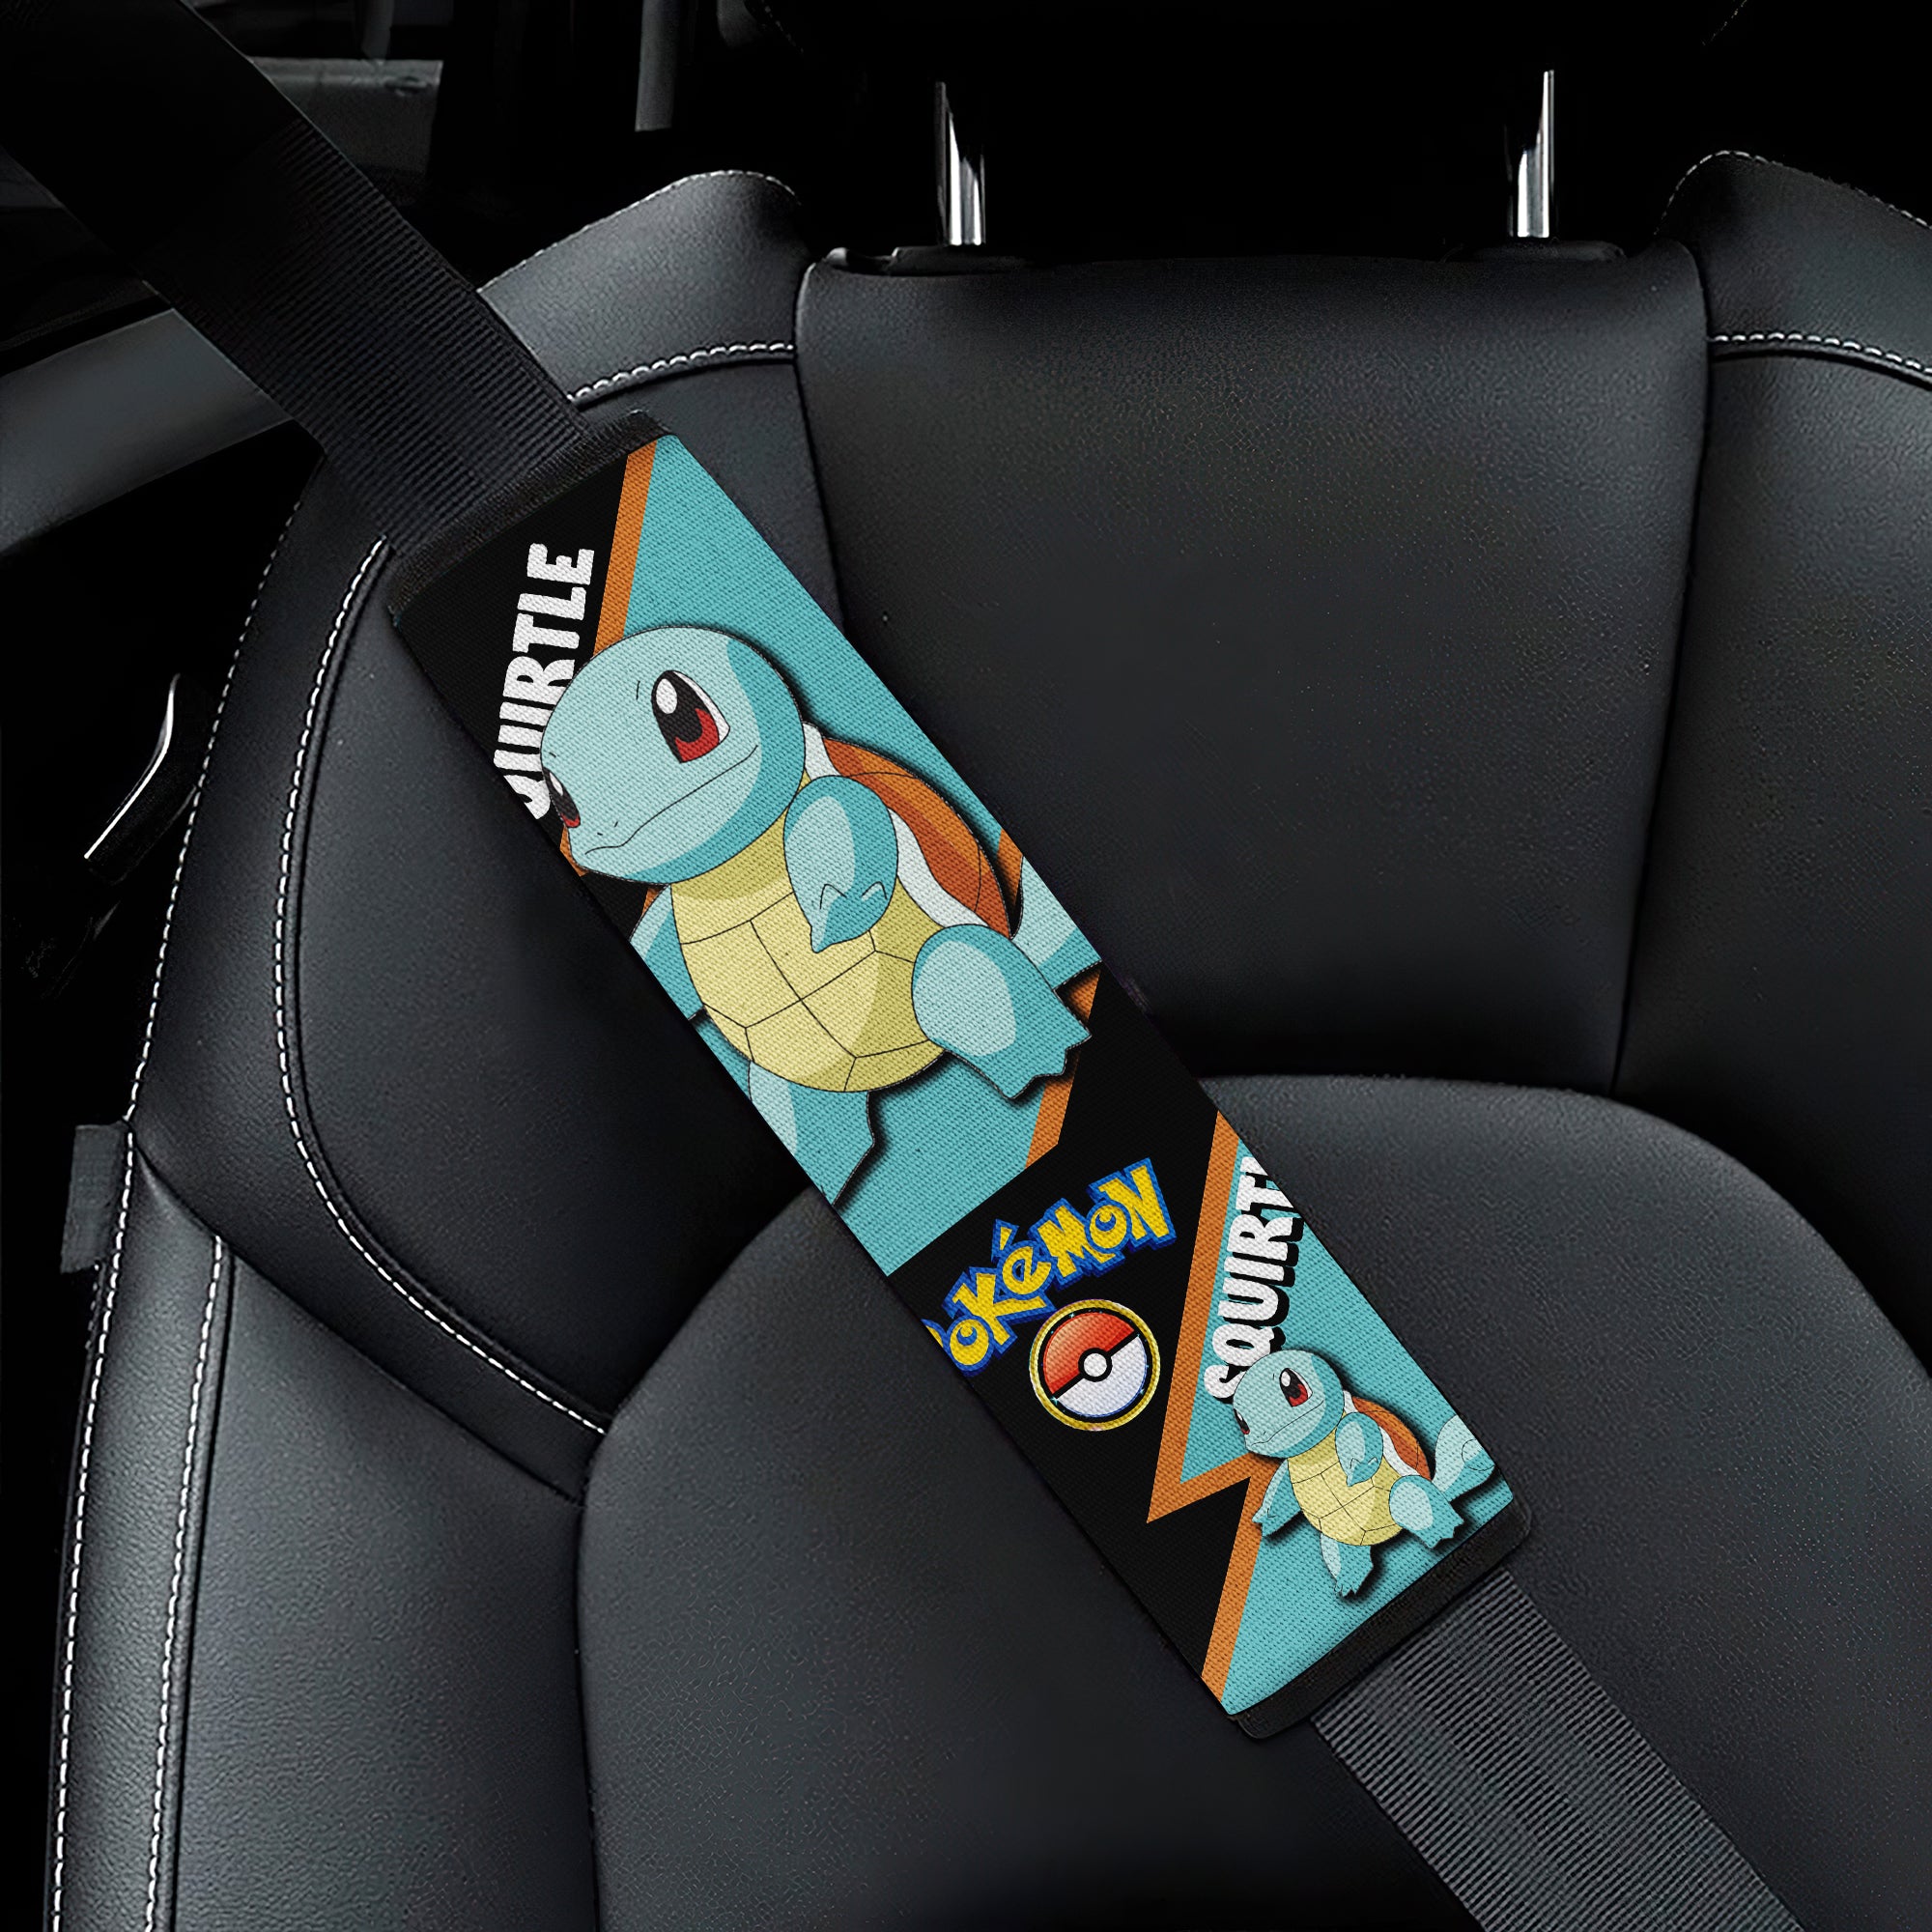 Squirtle car seat belt covers Anime Pokemon Custom Car Accessories